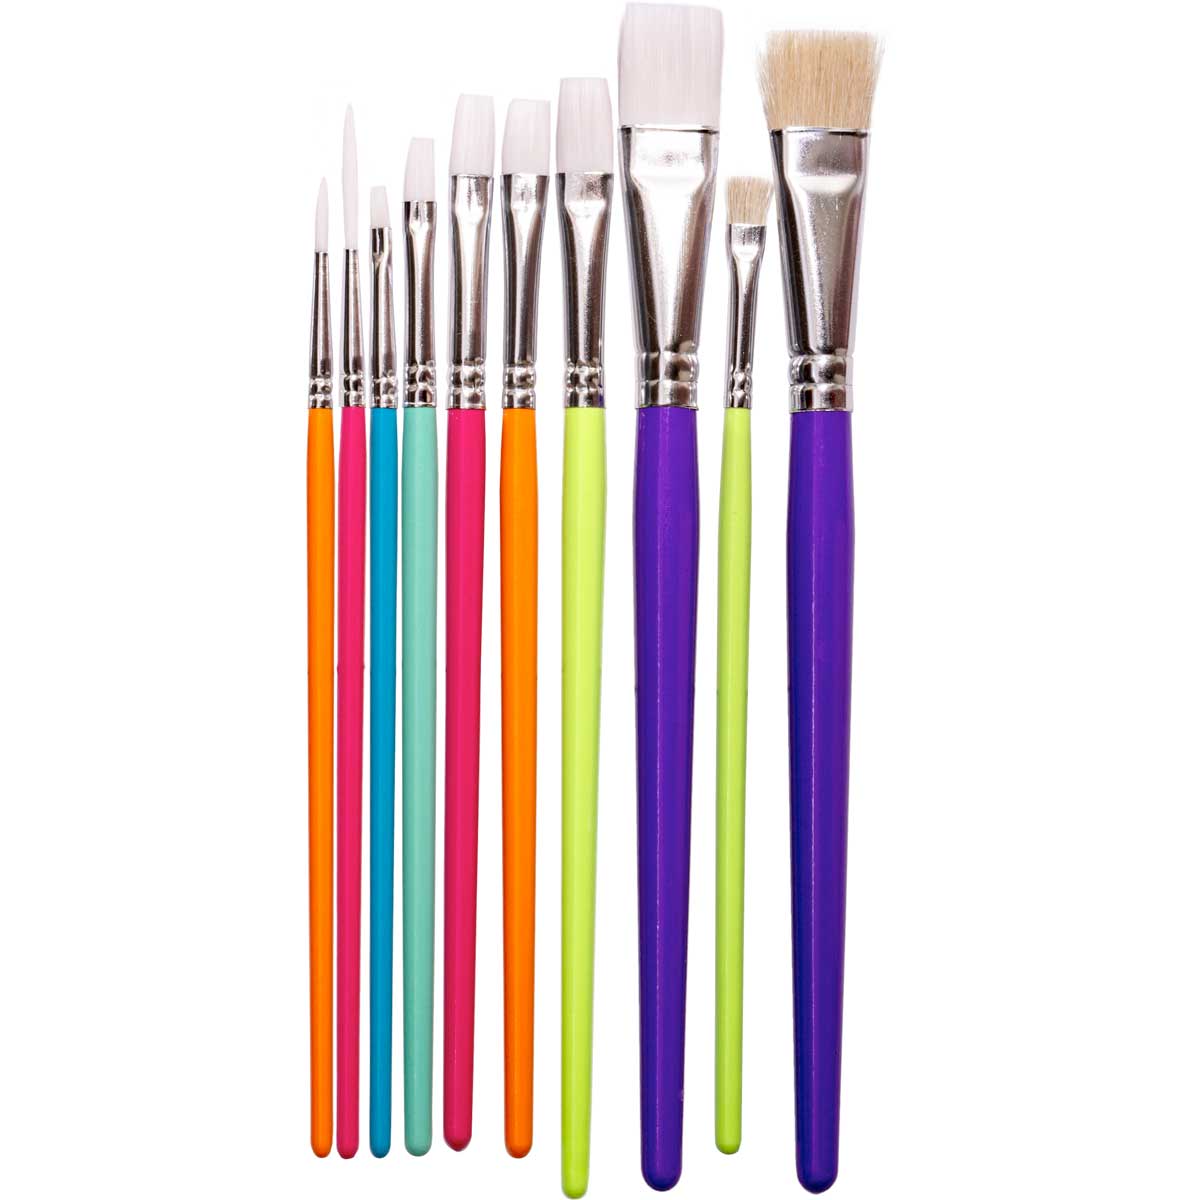 Plaid ® Color By Me™ Brush Sets - Artist Brushes, 10 pc. - 4930E